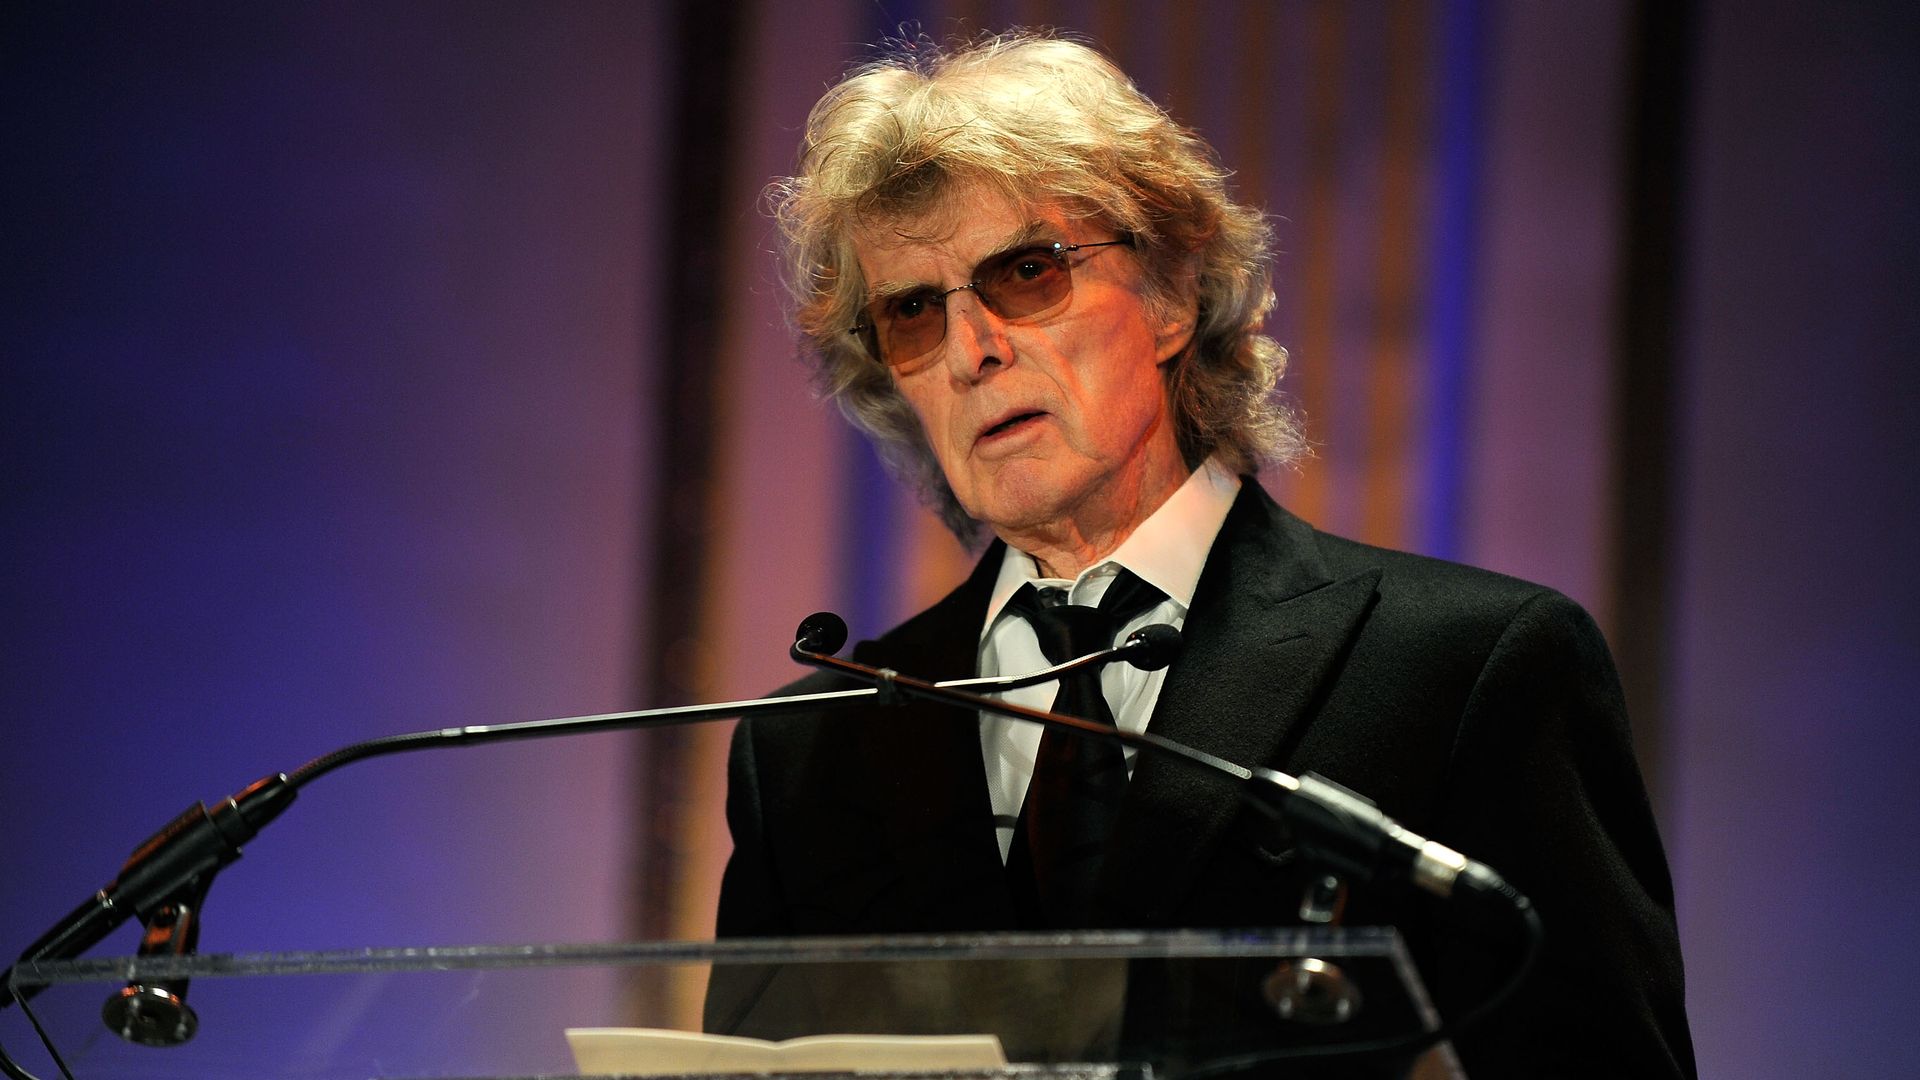 In this image, Don Imus stands at a podium